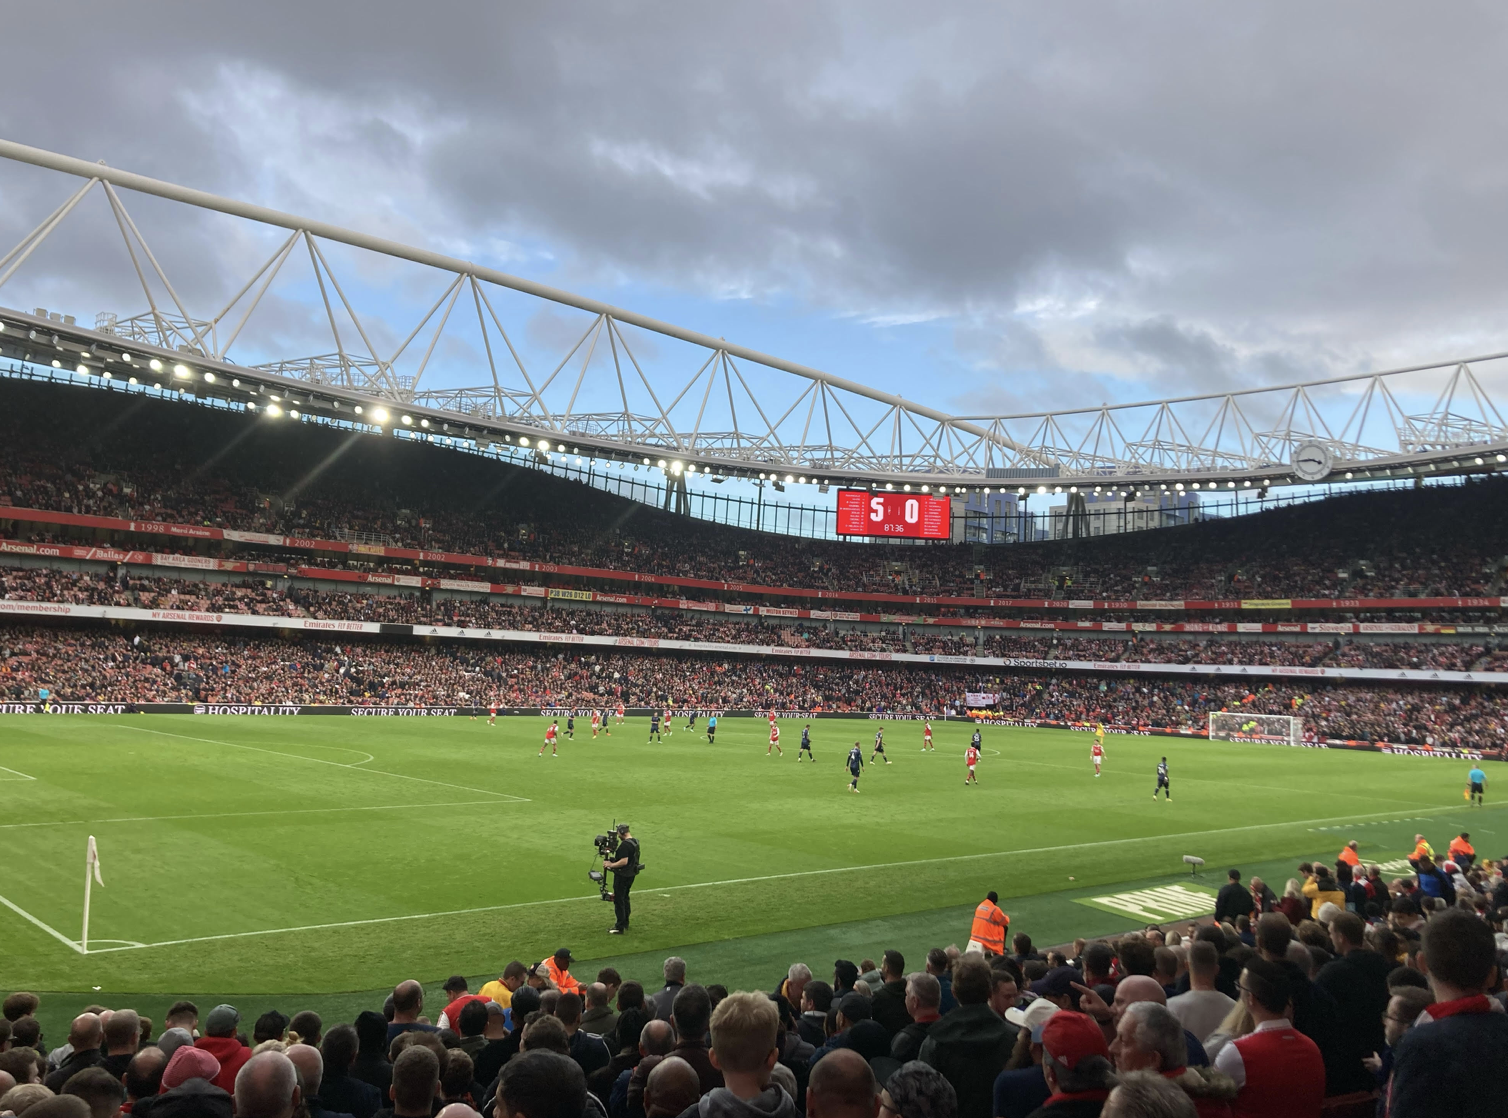 Brilliant to be back at The Arsenal says long-time Gooner Fozzy after first live match since before Covid 